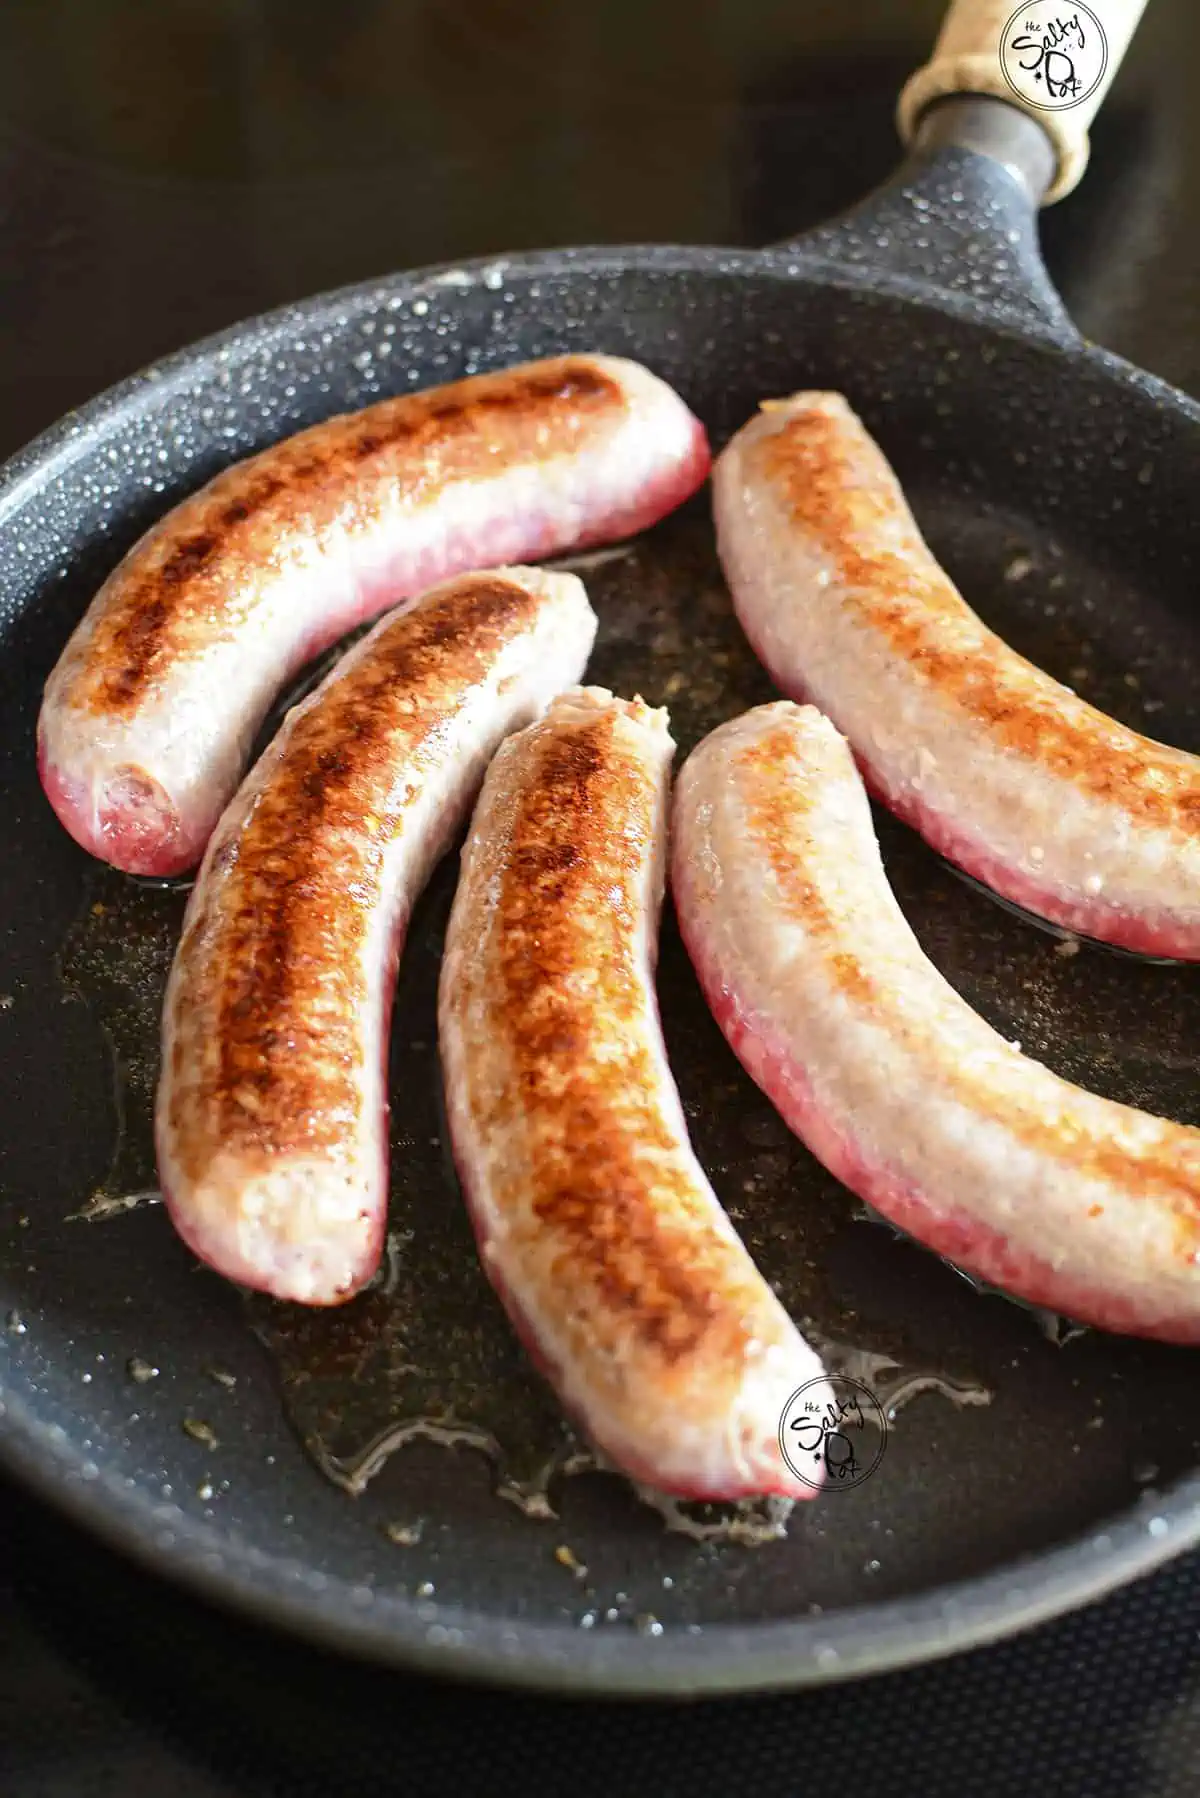 5 cooking bratwurst sausages in a cast iron skillet.